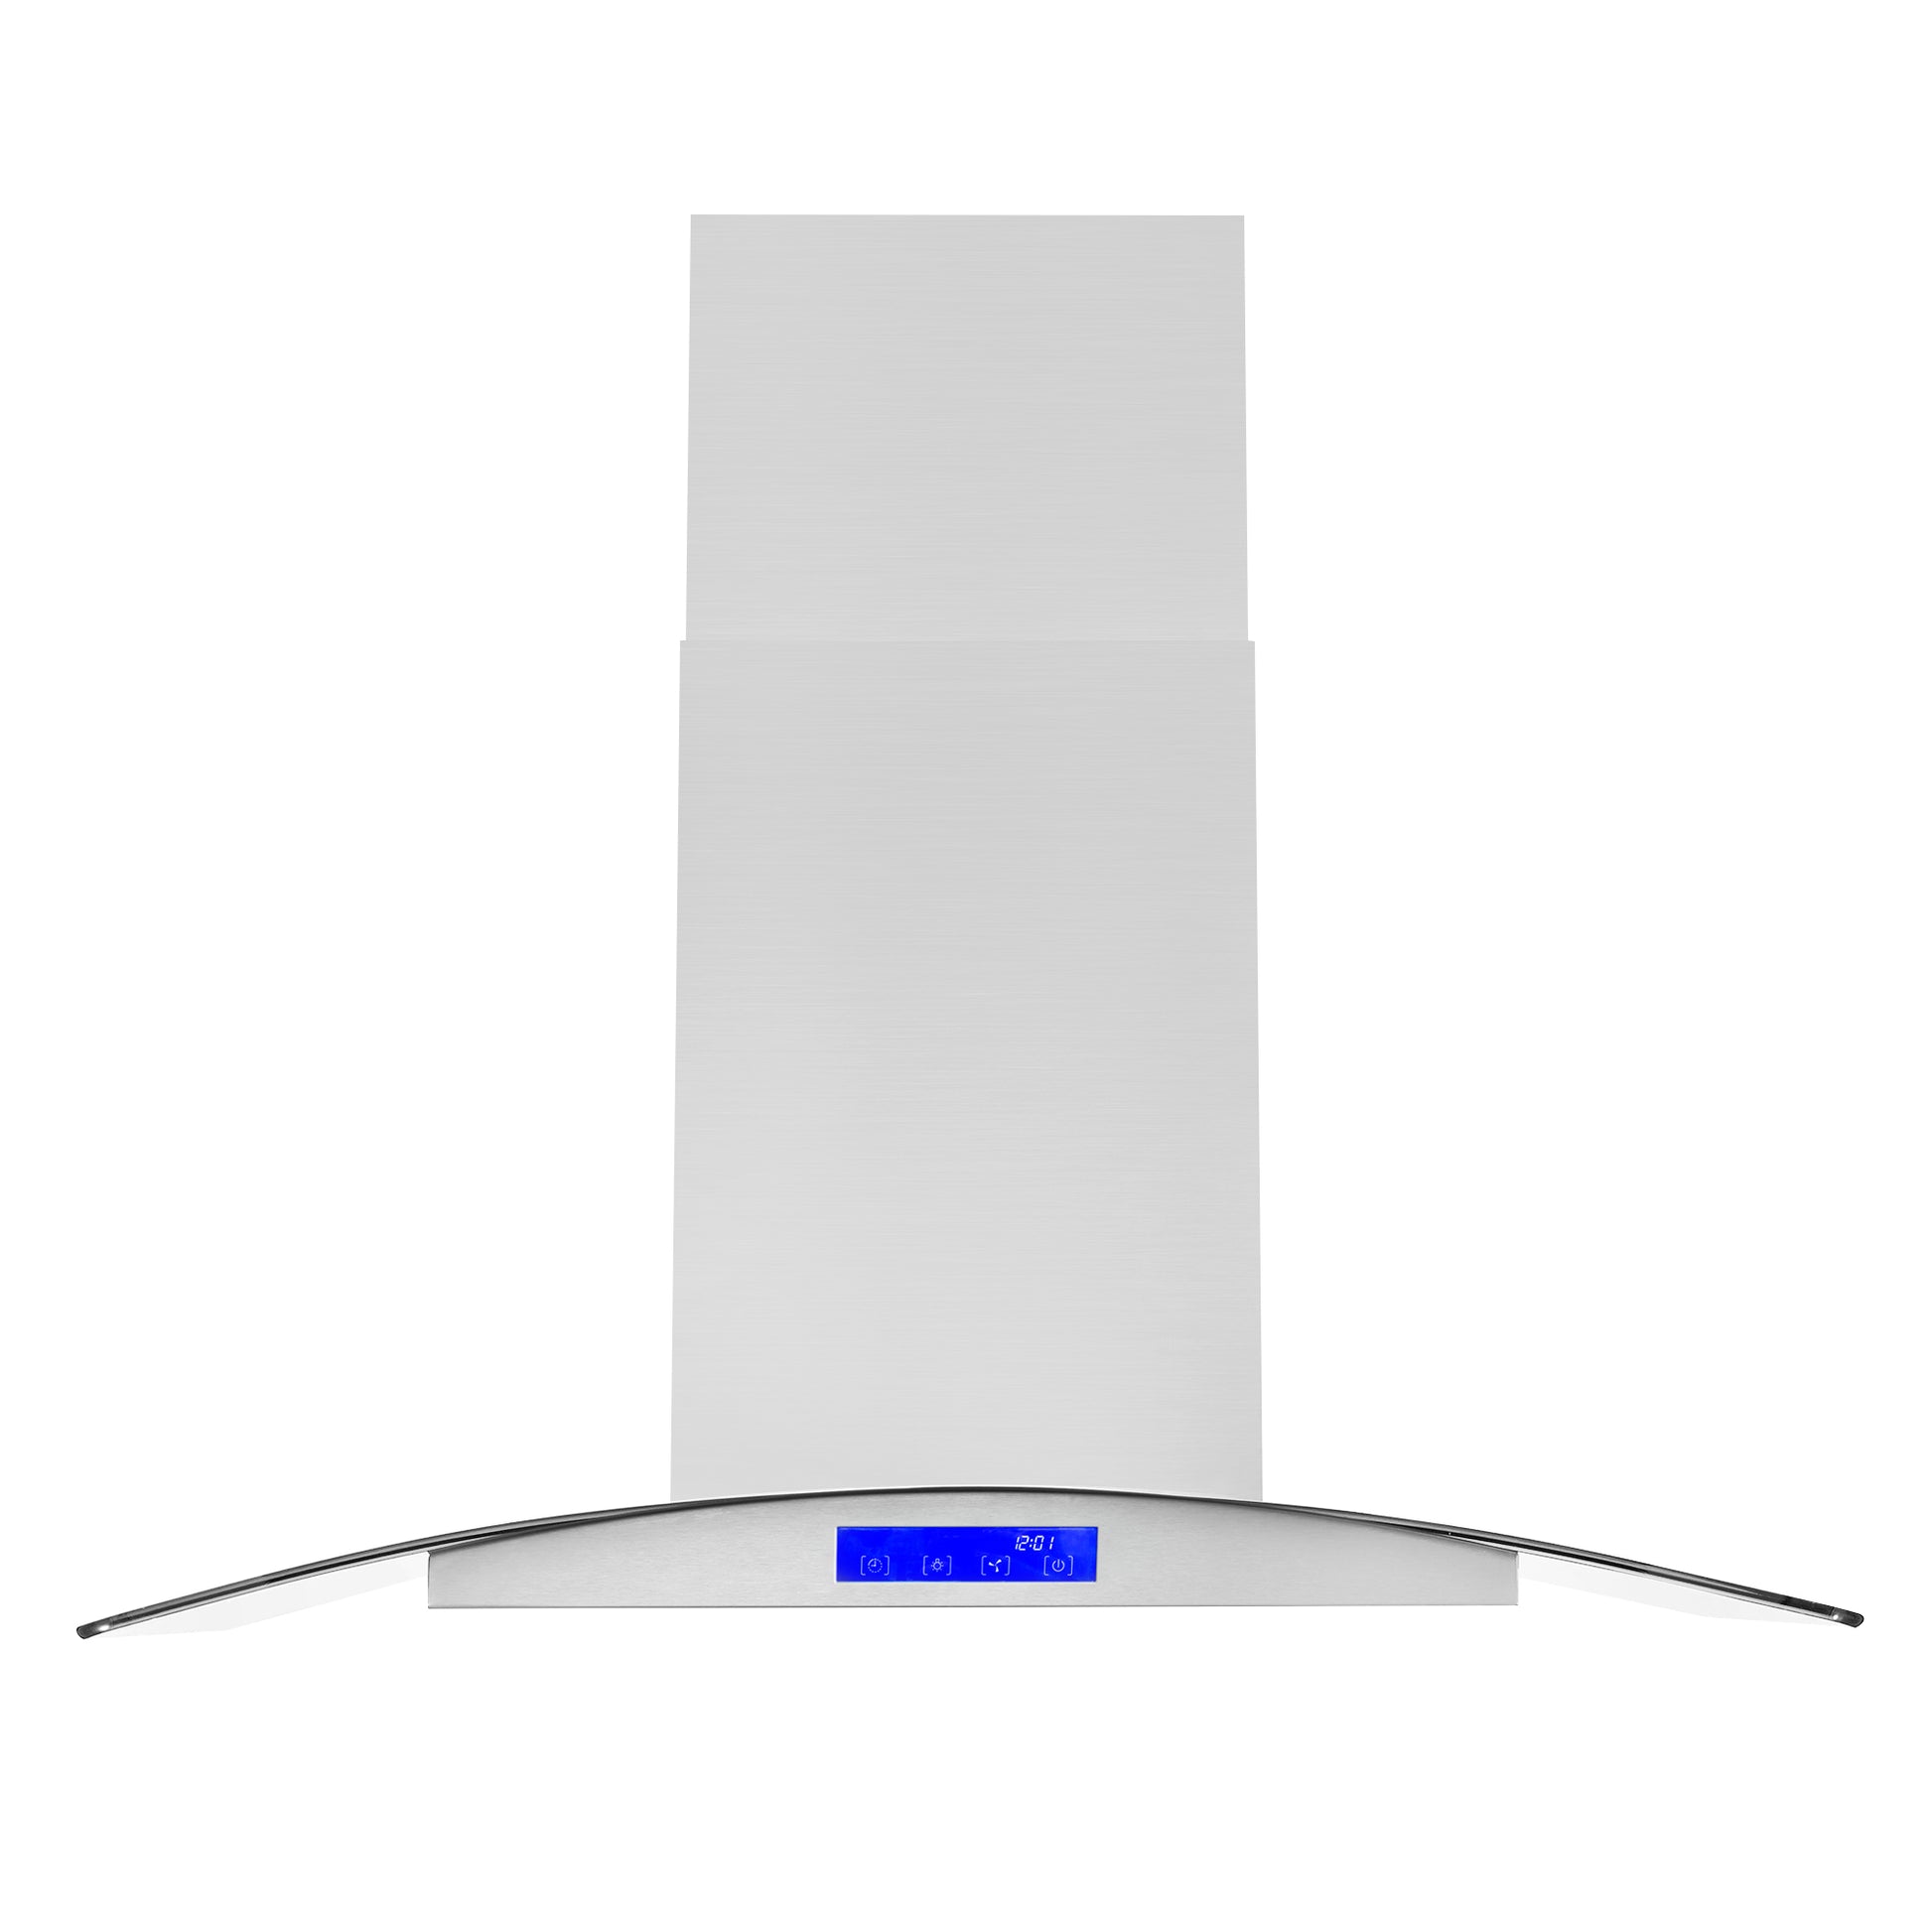 Cosmo 36 in. Stainless Steel Island Range Hood with 380 CFM, 3 Speeds, Ducted, Permanent Filters, Curved Glass Hood